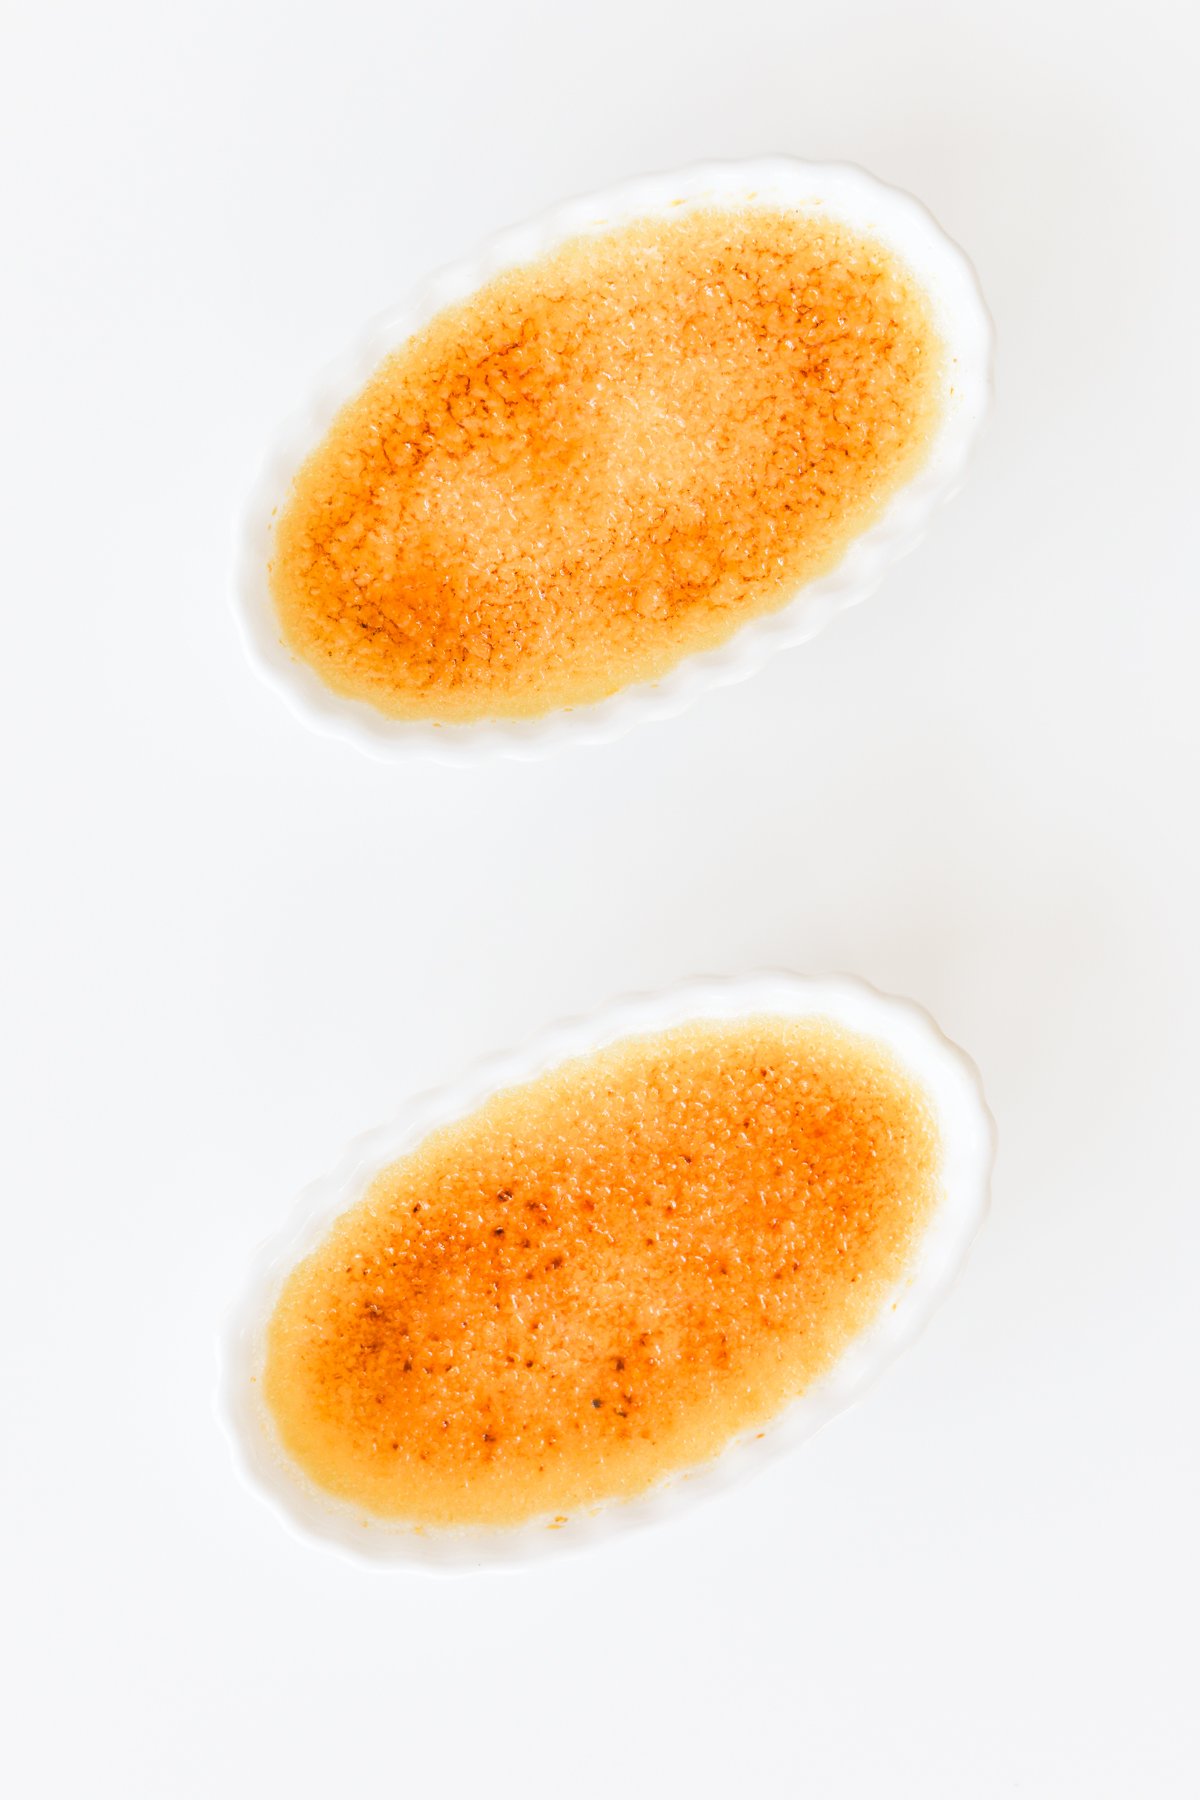 Two bowls of easy creme brulee on a white background.